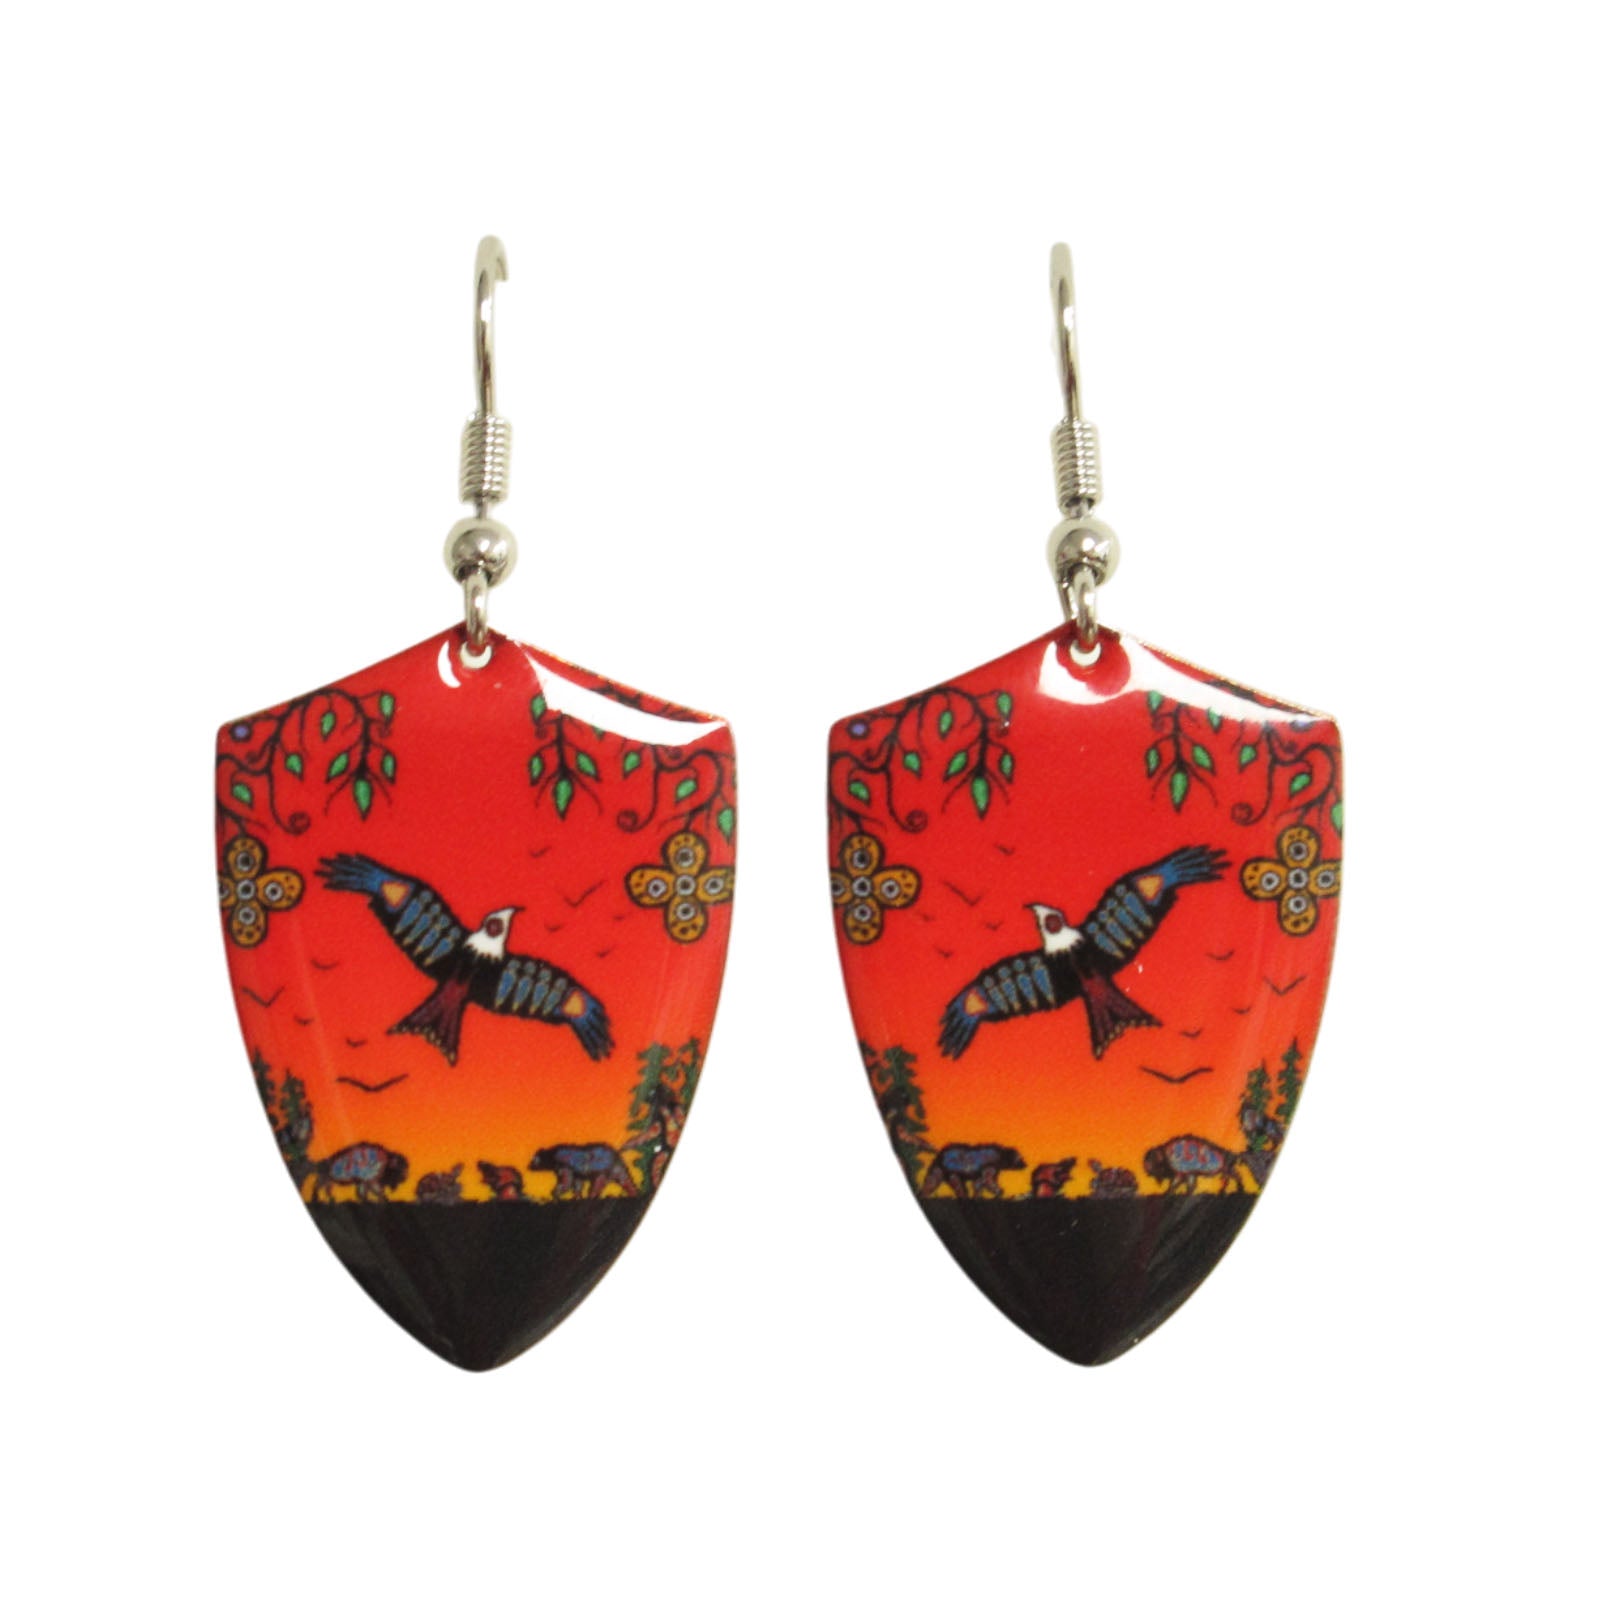 Cody Houle Seven Grandfather Teachings Gallery Collection Earrings